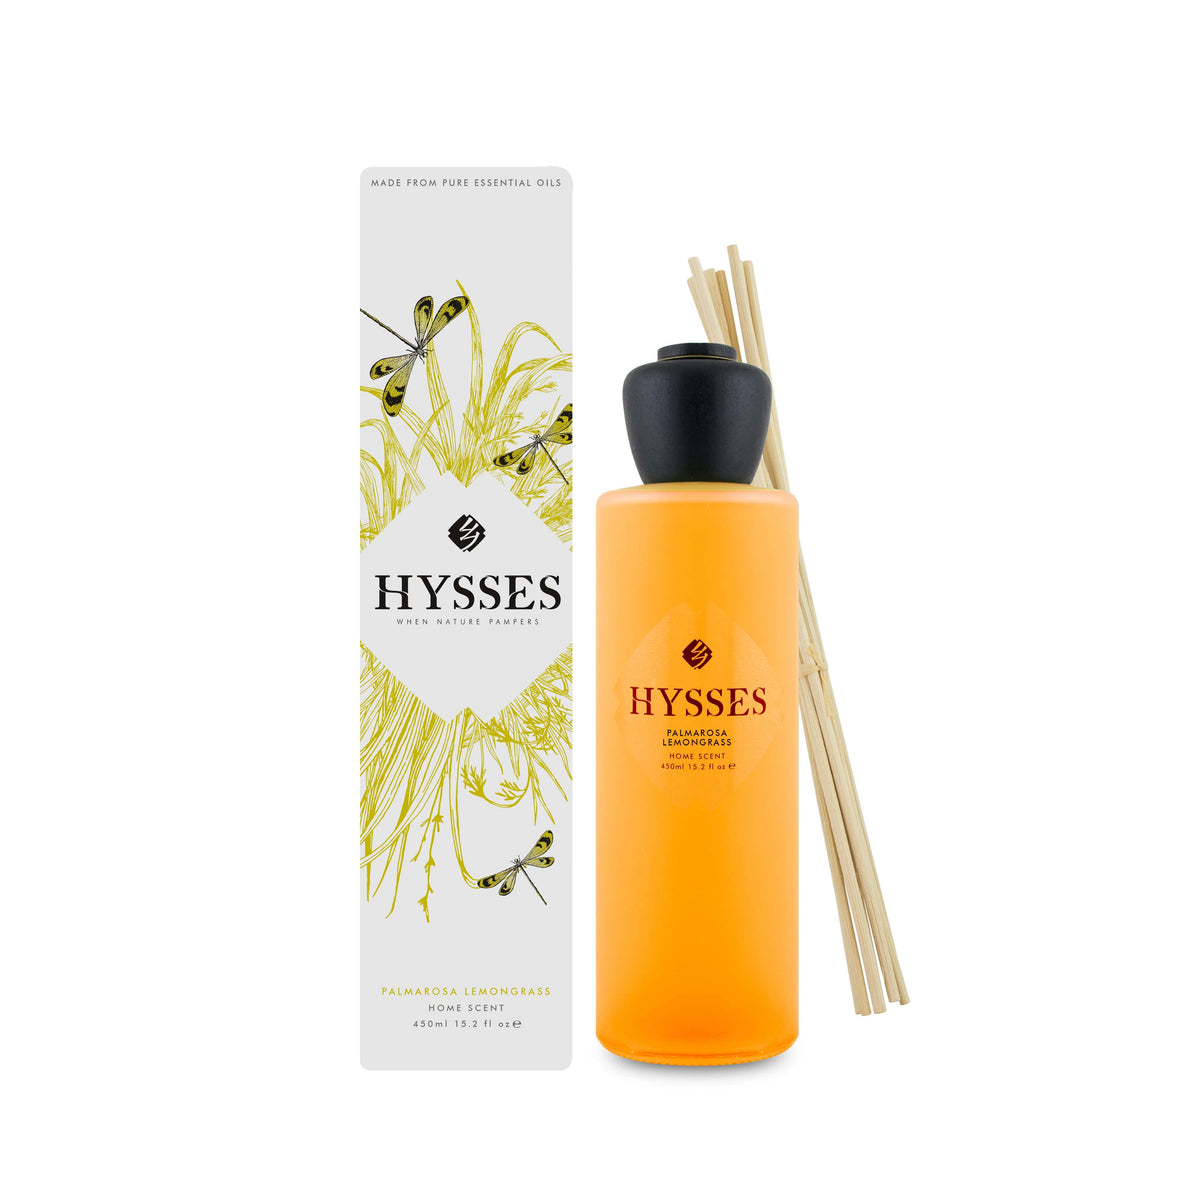 Hysses Home Scents 450ml Home Scent Reed Diffuser Palmarosa Lemongrass